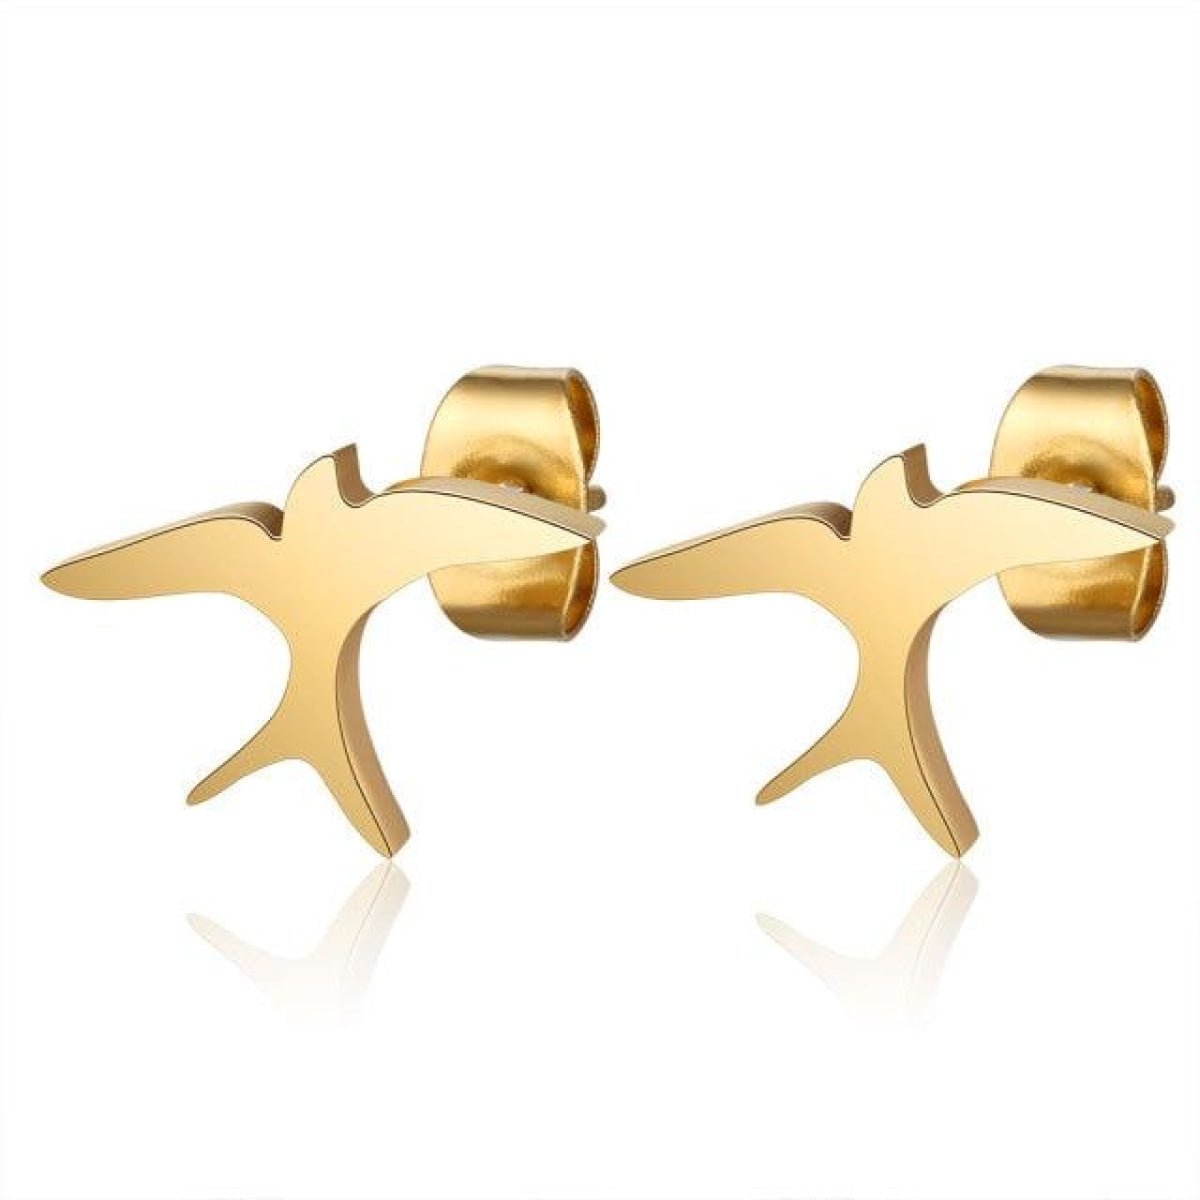 1 Pair 316L Gold Silver Colour Stainless Steel SS Night Owl Humming Bird Swallow Stud Earring Jewellery Gift - Bird 1 - Gold - - Asia Sell